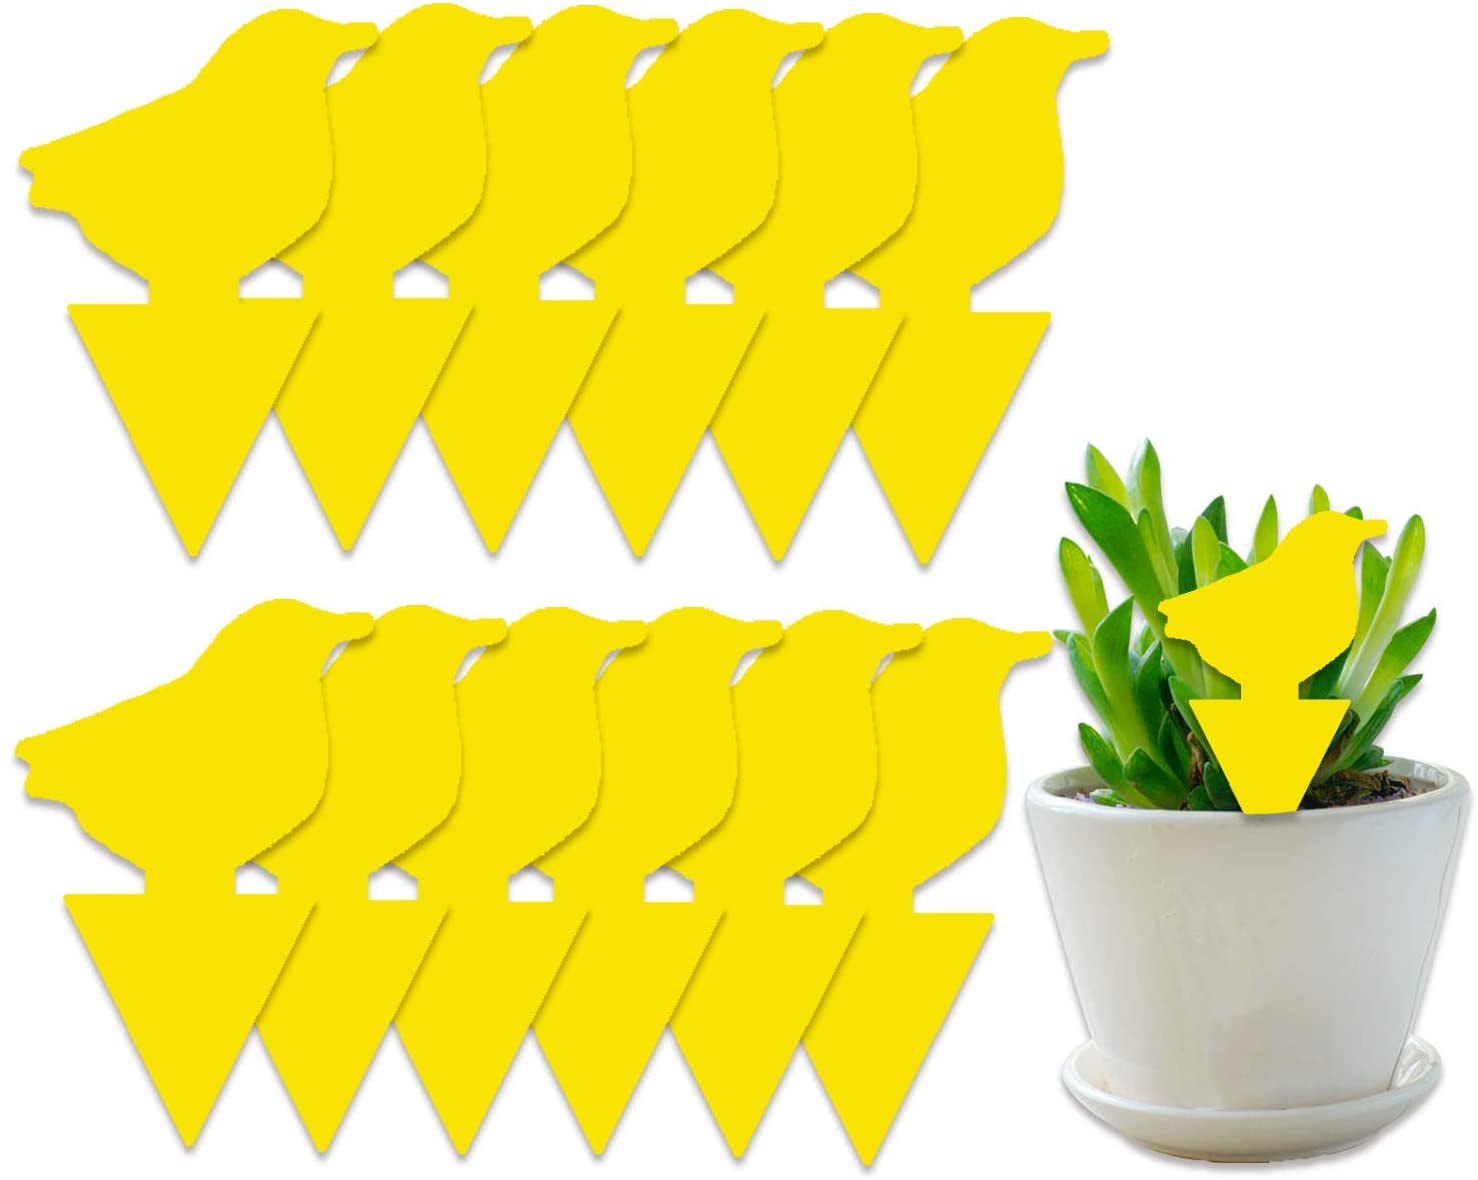 Details about   20-Pack Dual-Sided Yellow Sticky Traps for Fungus Gnat Whitefly Leafminers Aphid 